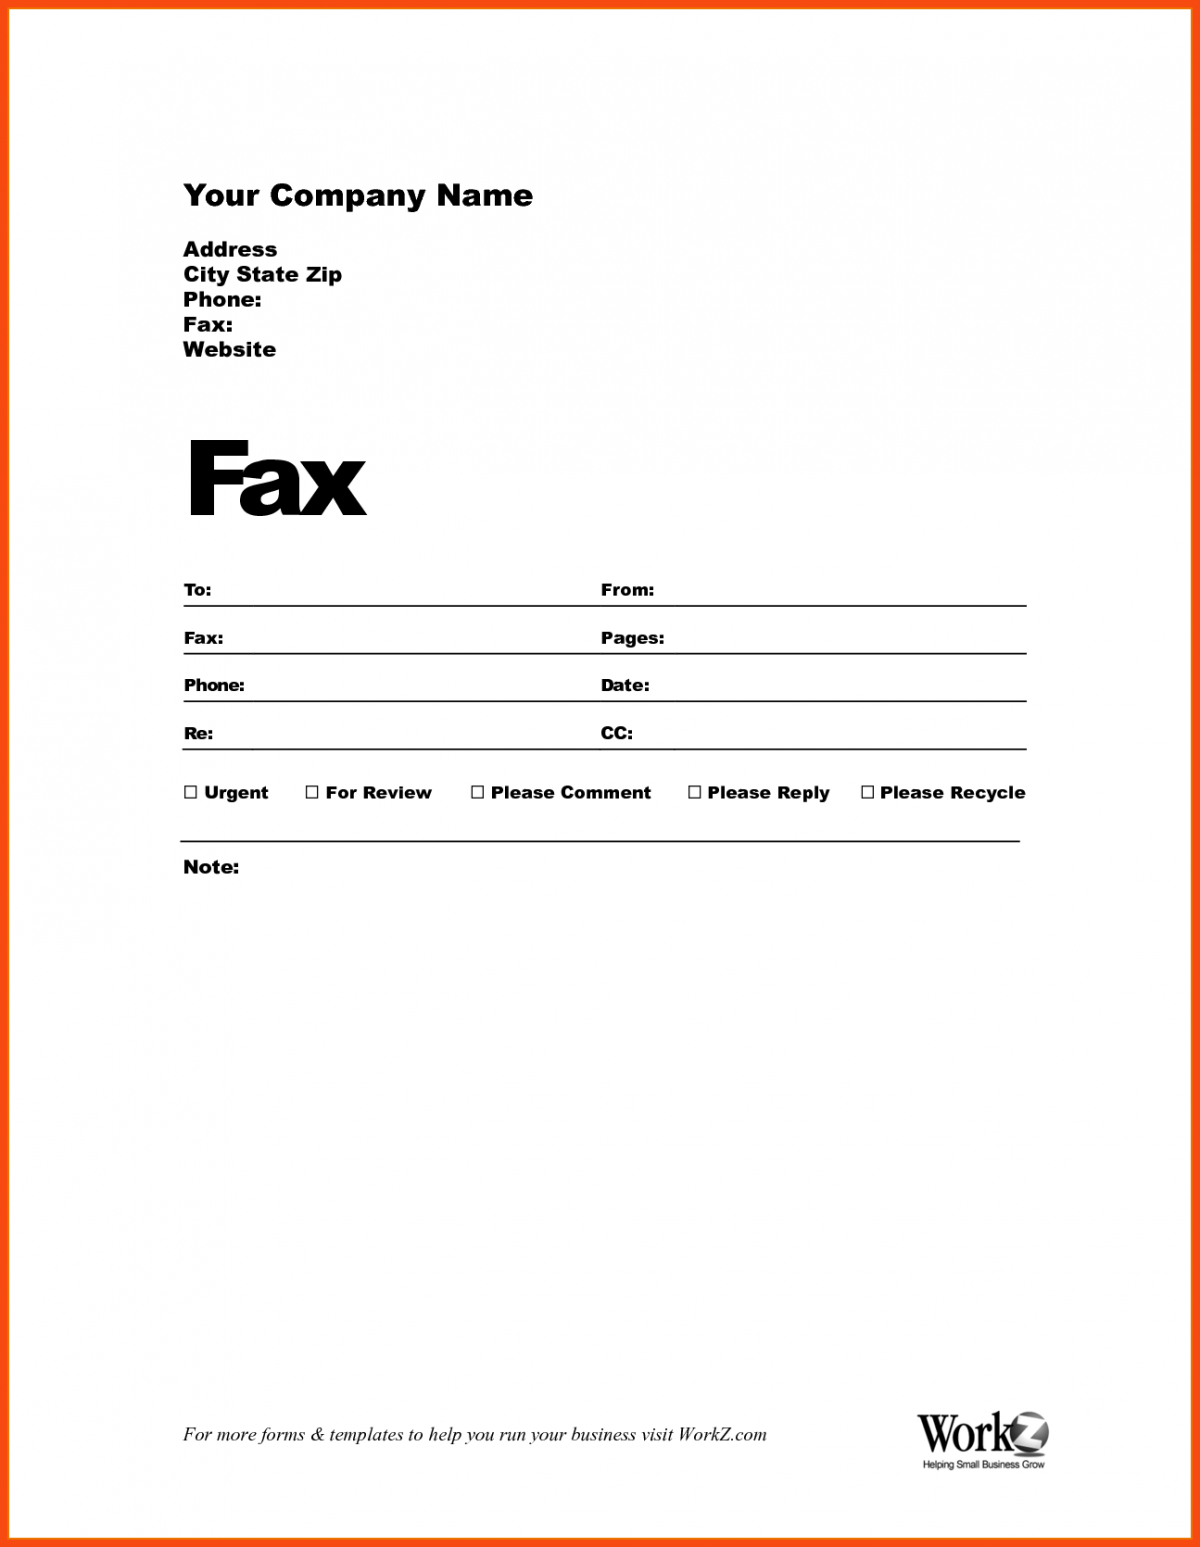 how-to-fill-out-a-fax-cover-sheet